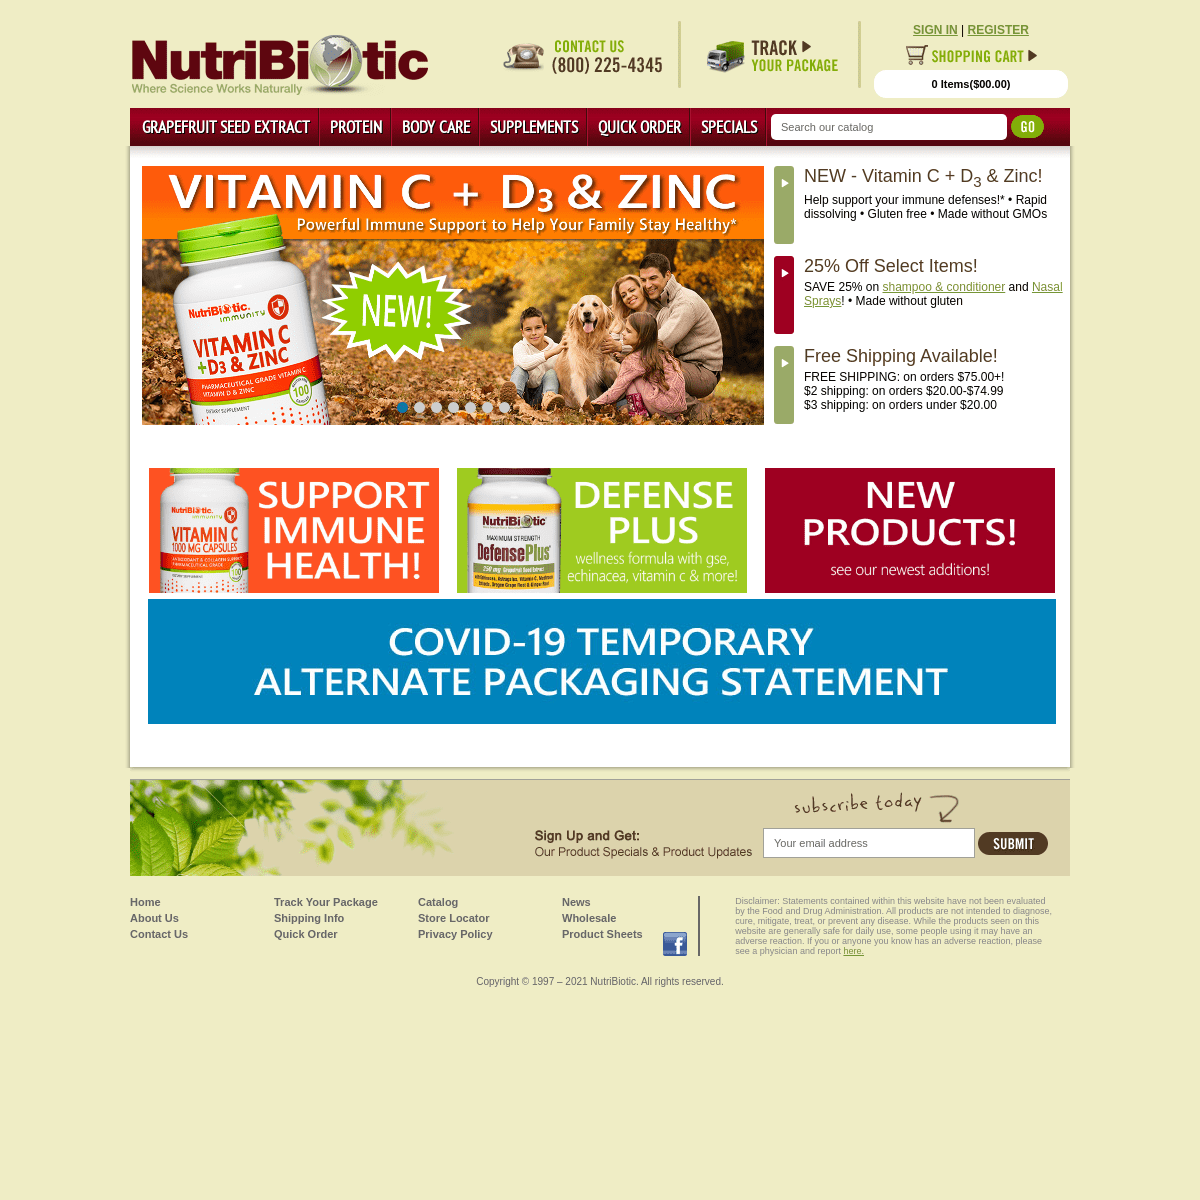 A complete backup of https://nutribiotic.com